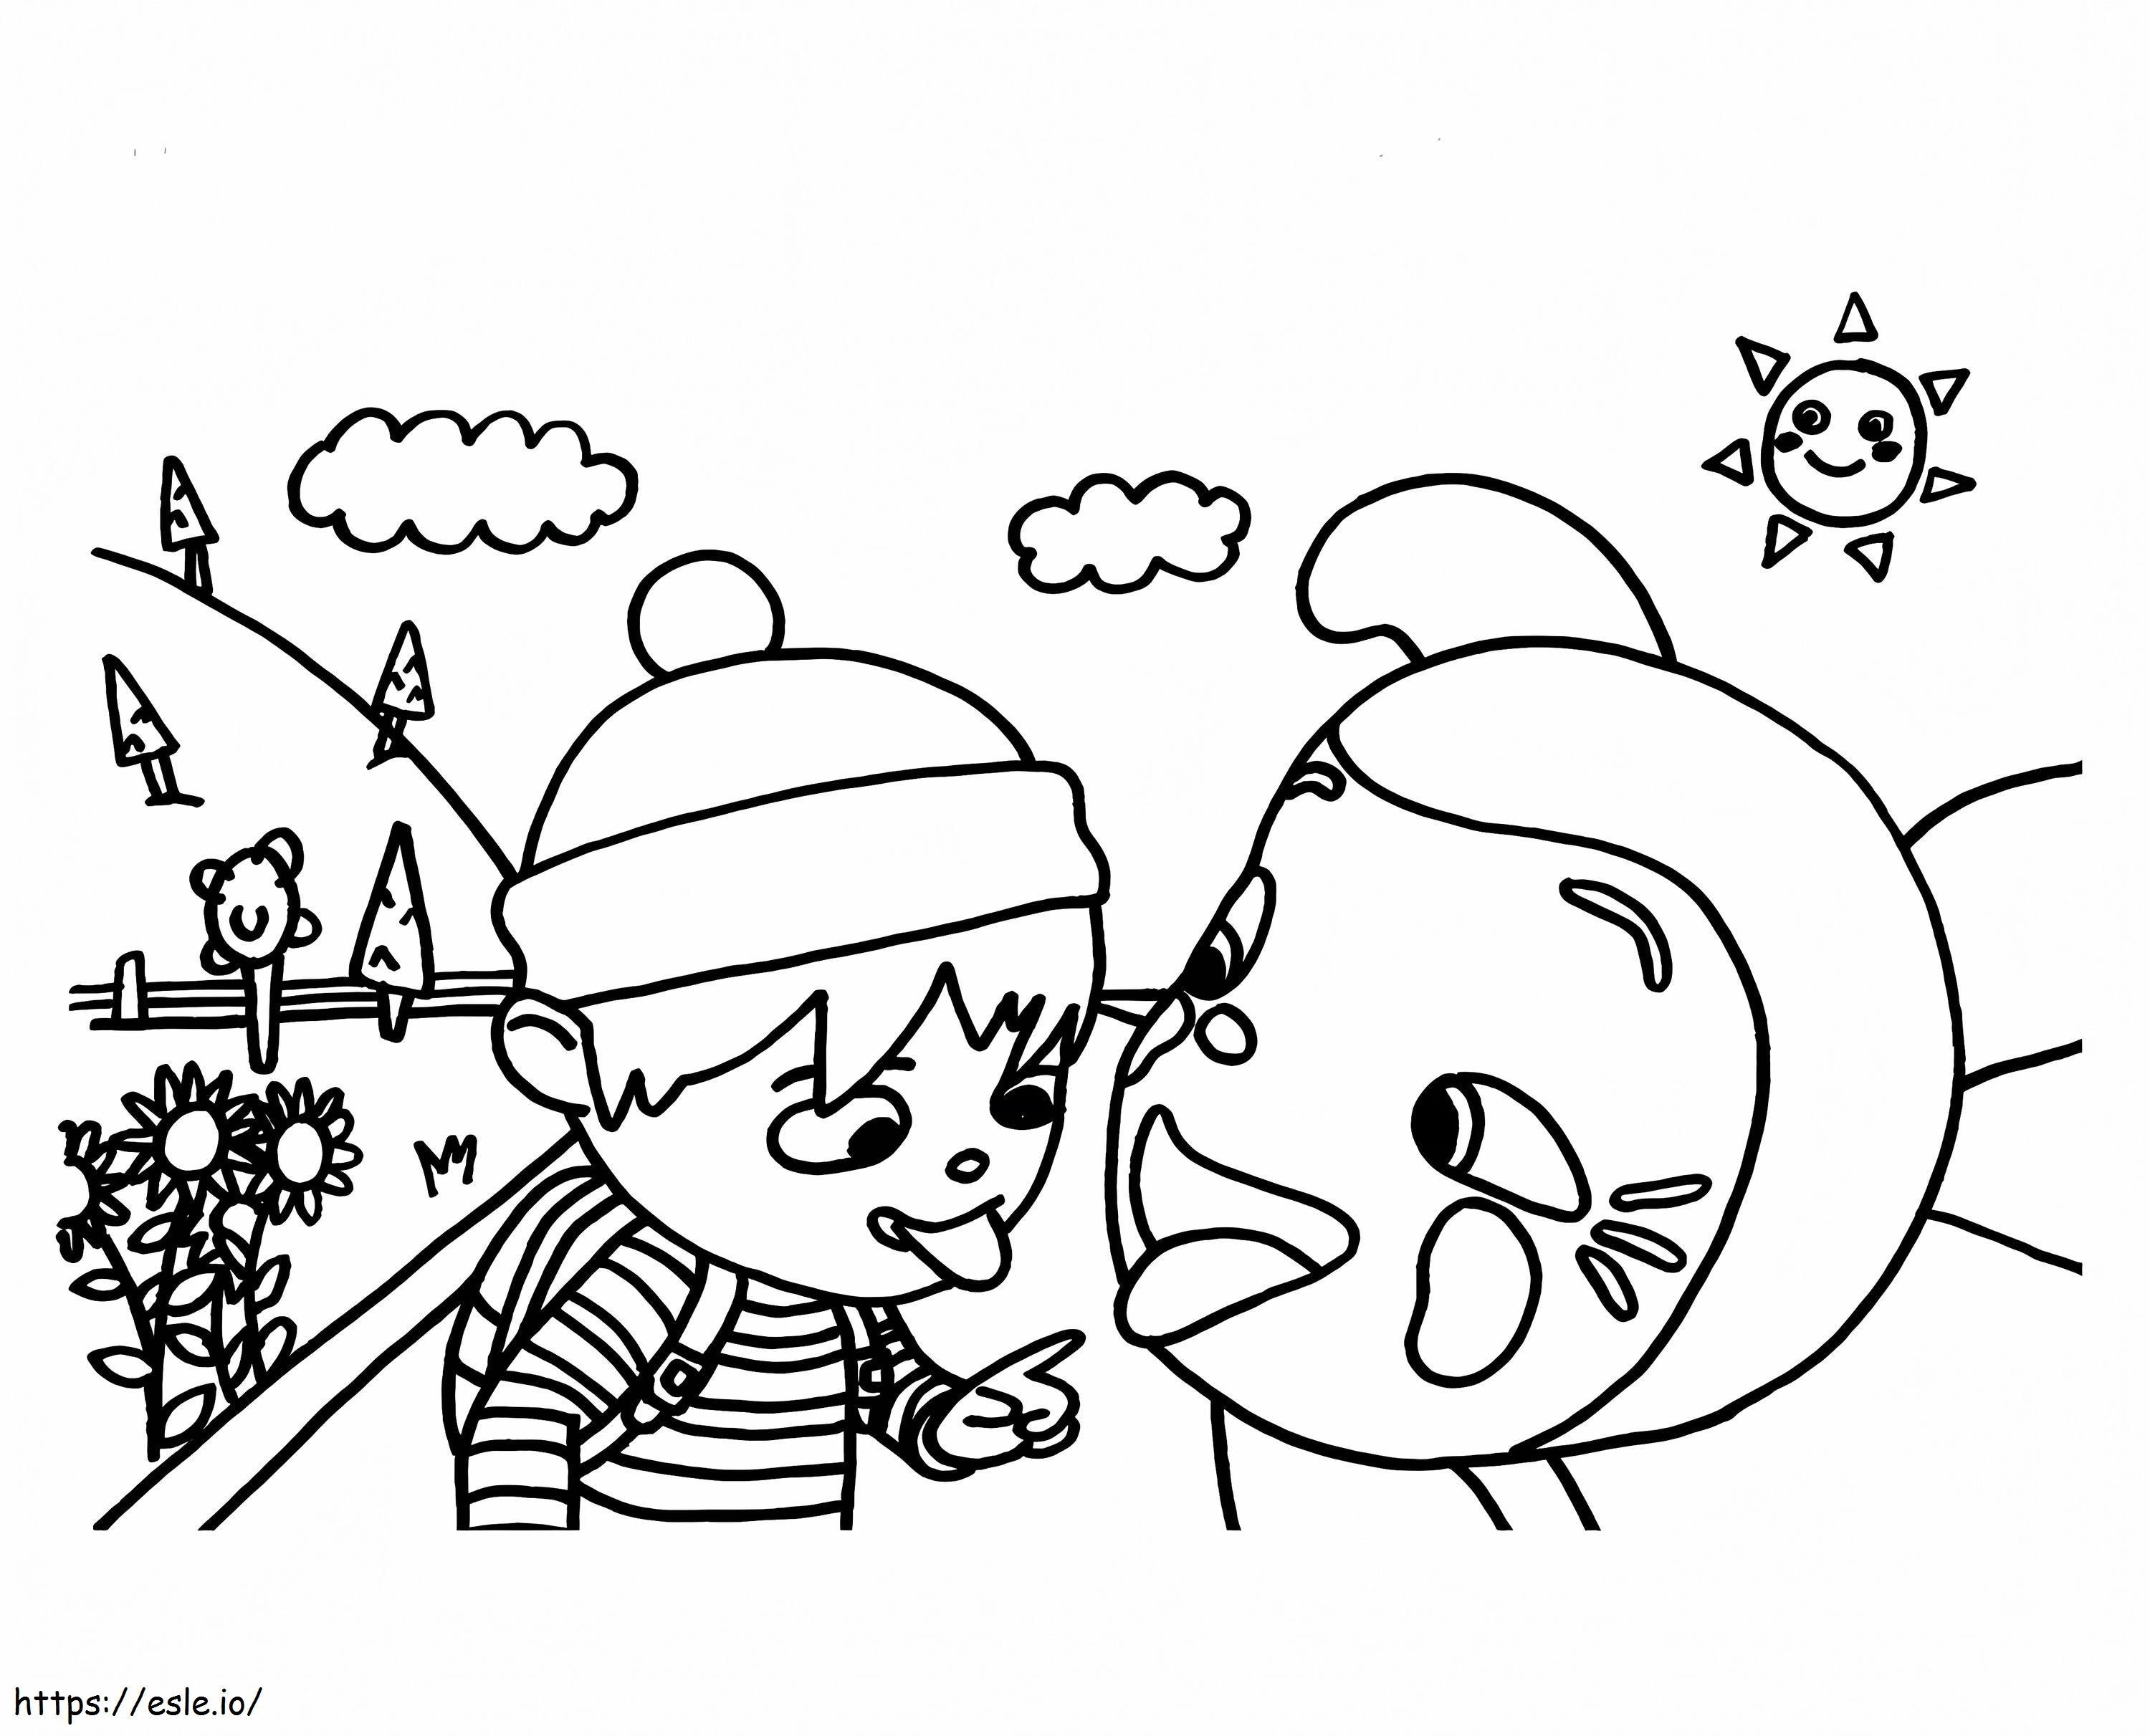 1581564626 C7Hkox4W0Aavz7Y coloring page